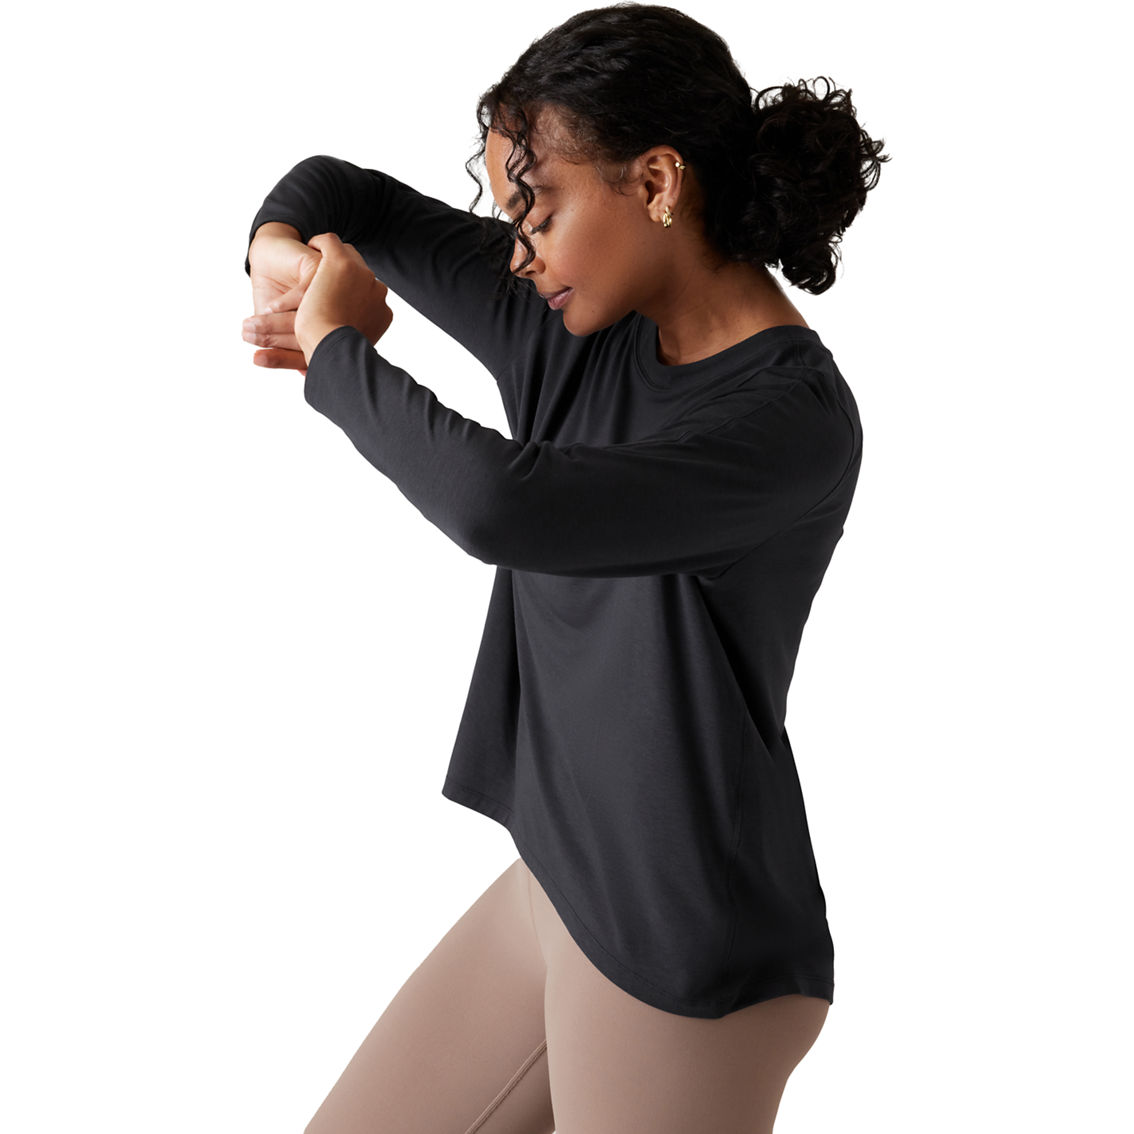 Athleta With Ease Top - Image 3 of 3